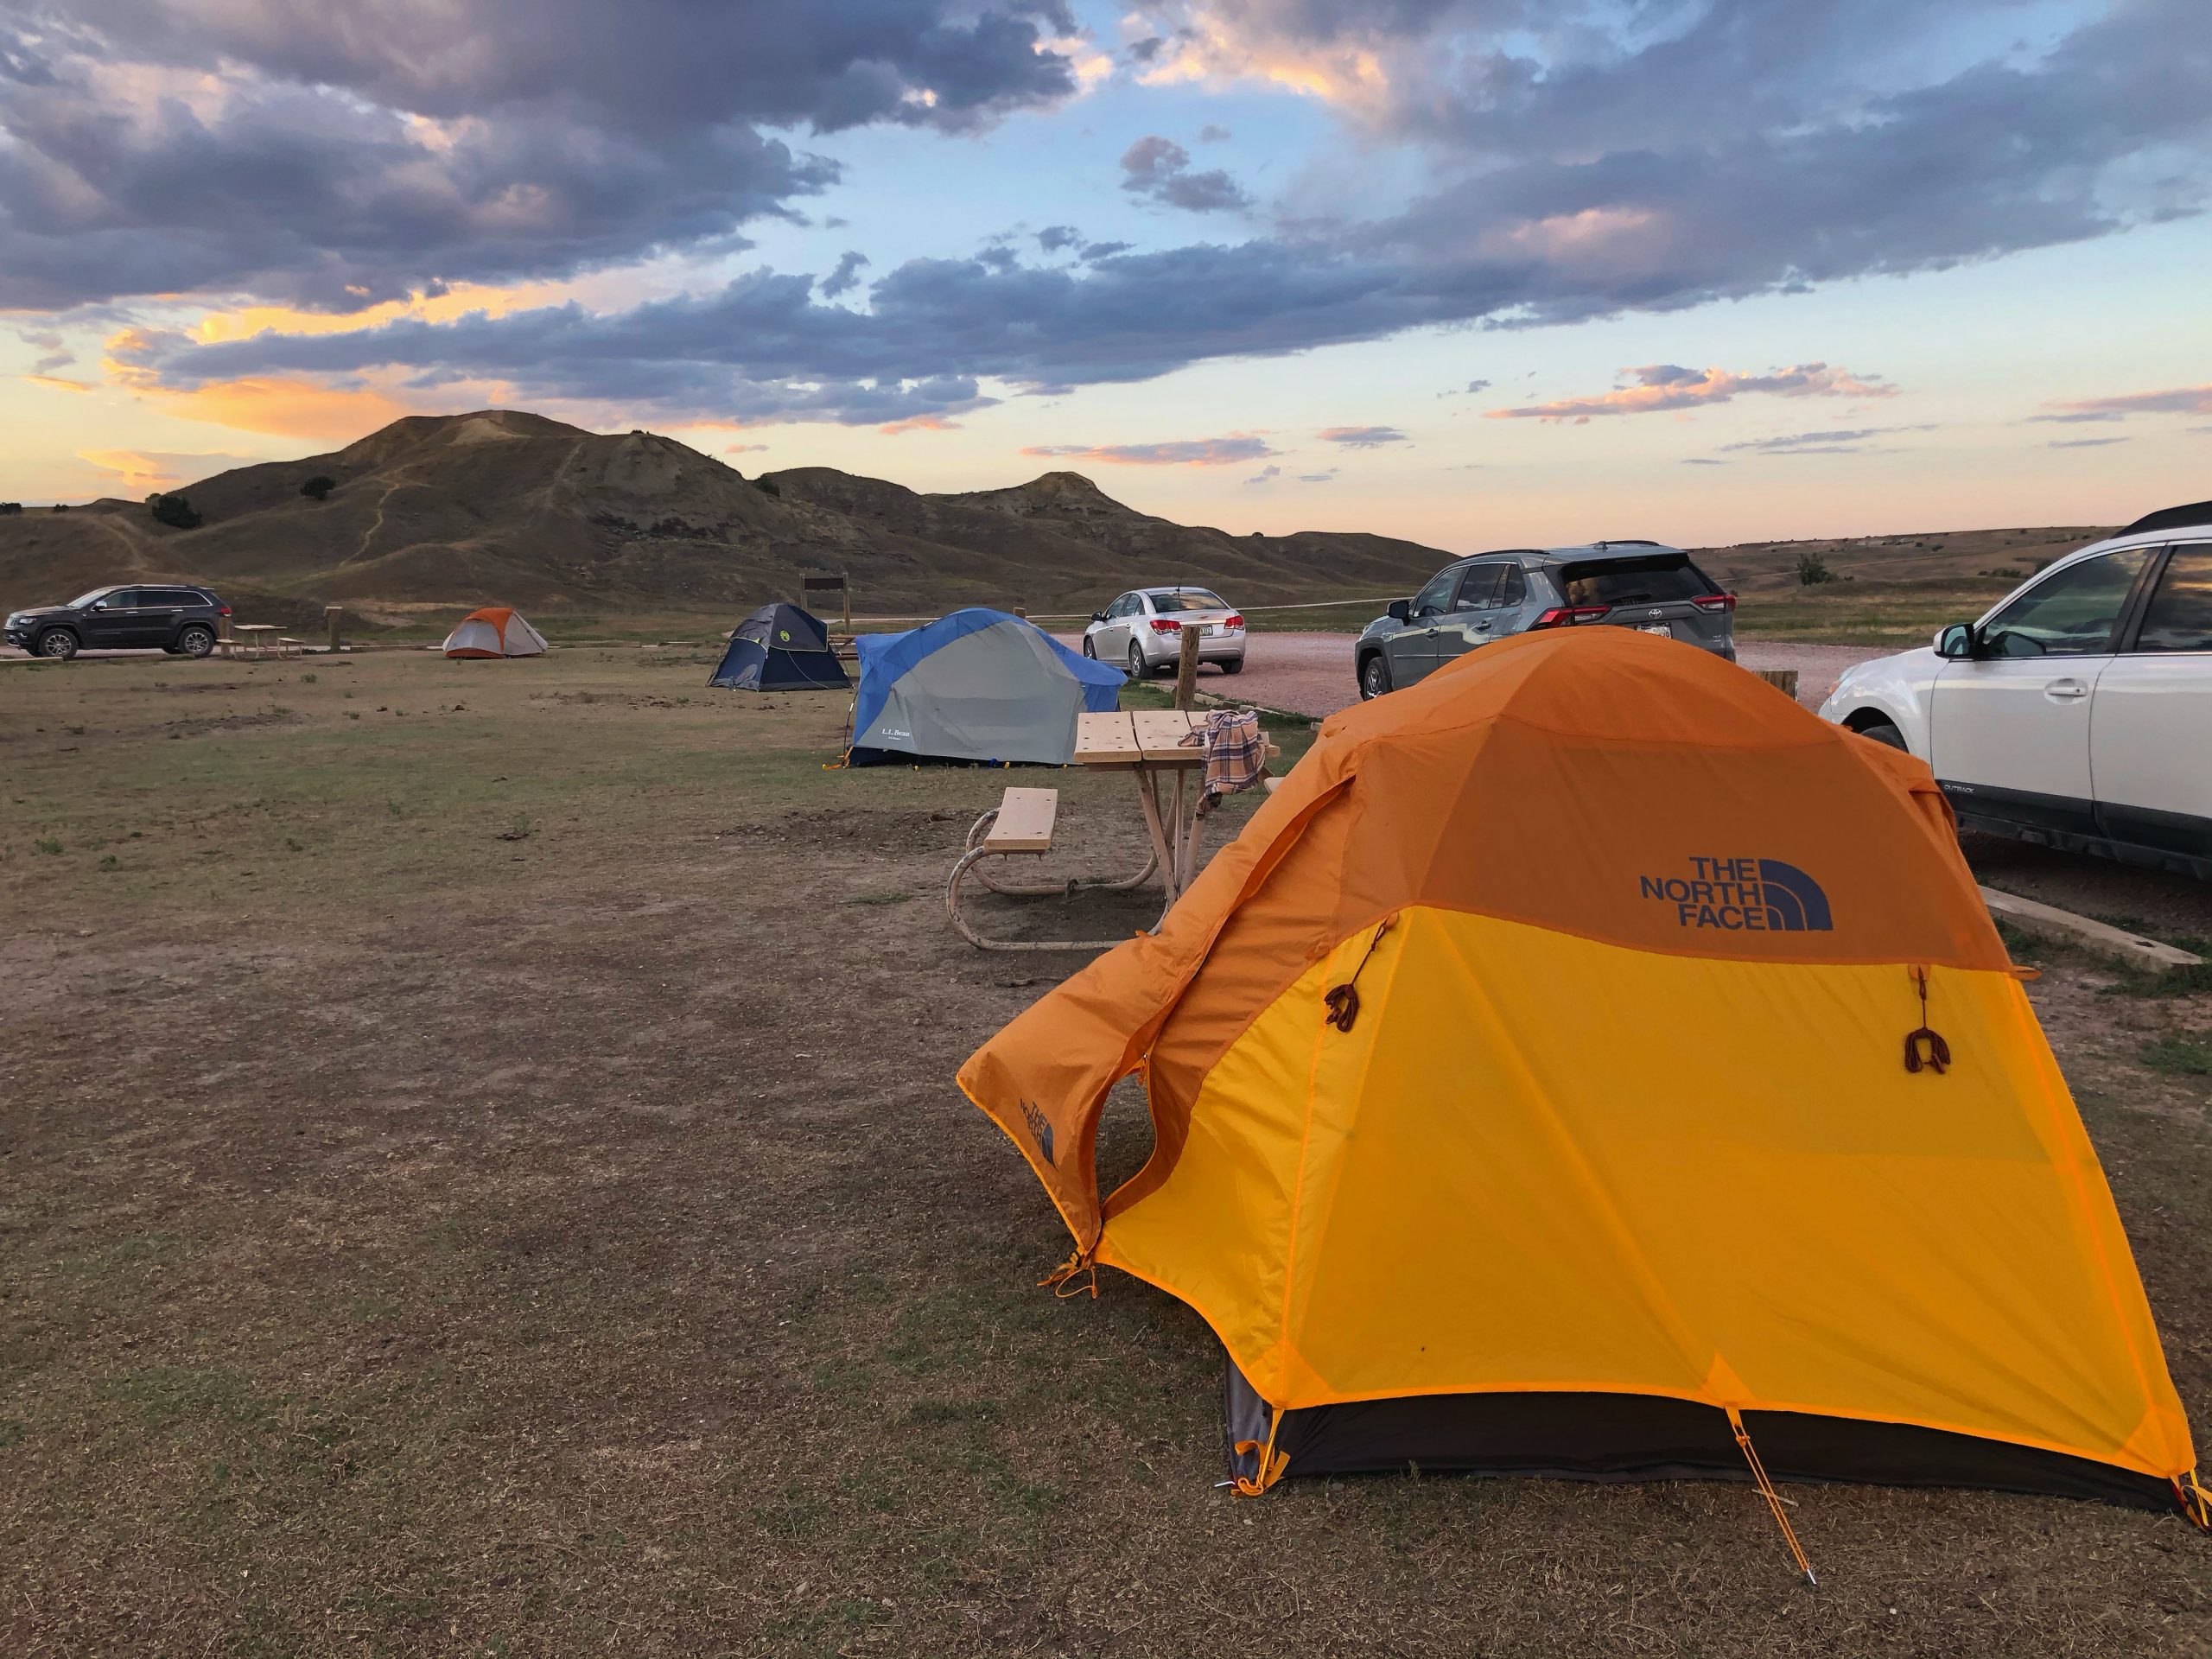 Tents in the Badlands